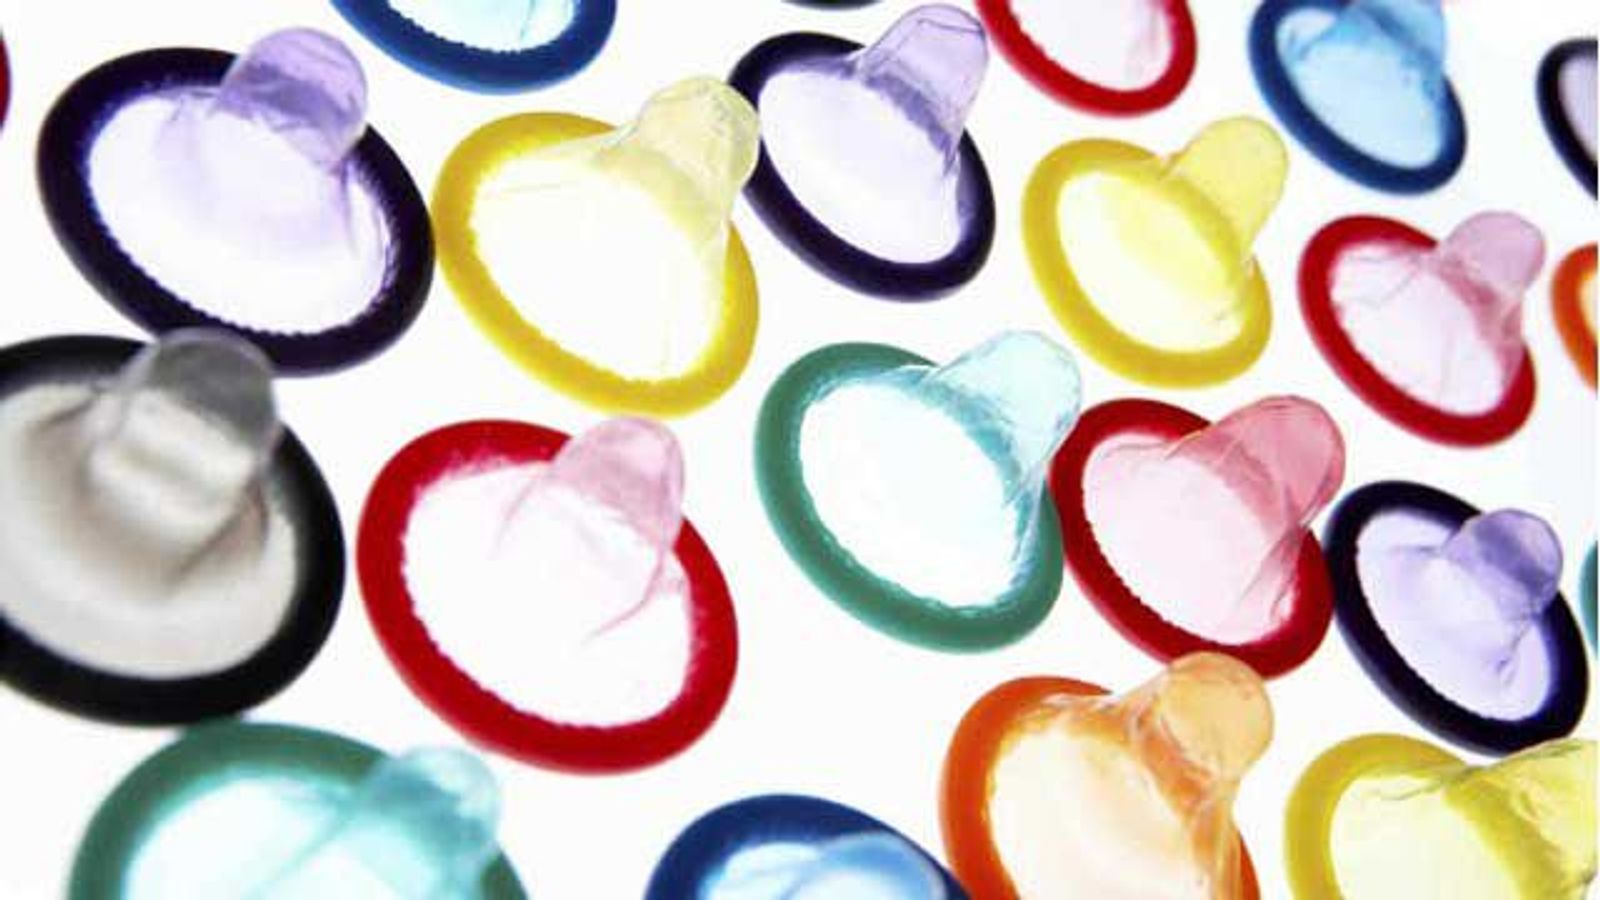 Gates Foundation Funds First Phase of Next Gen Super Condoms